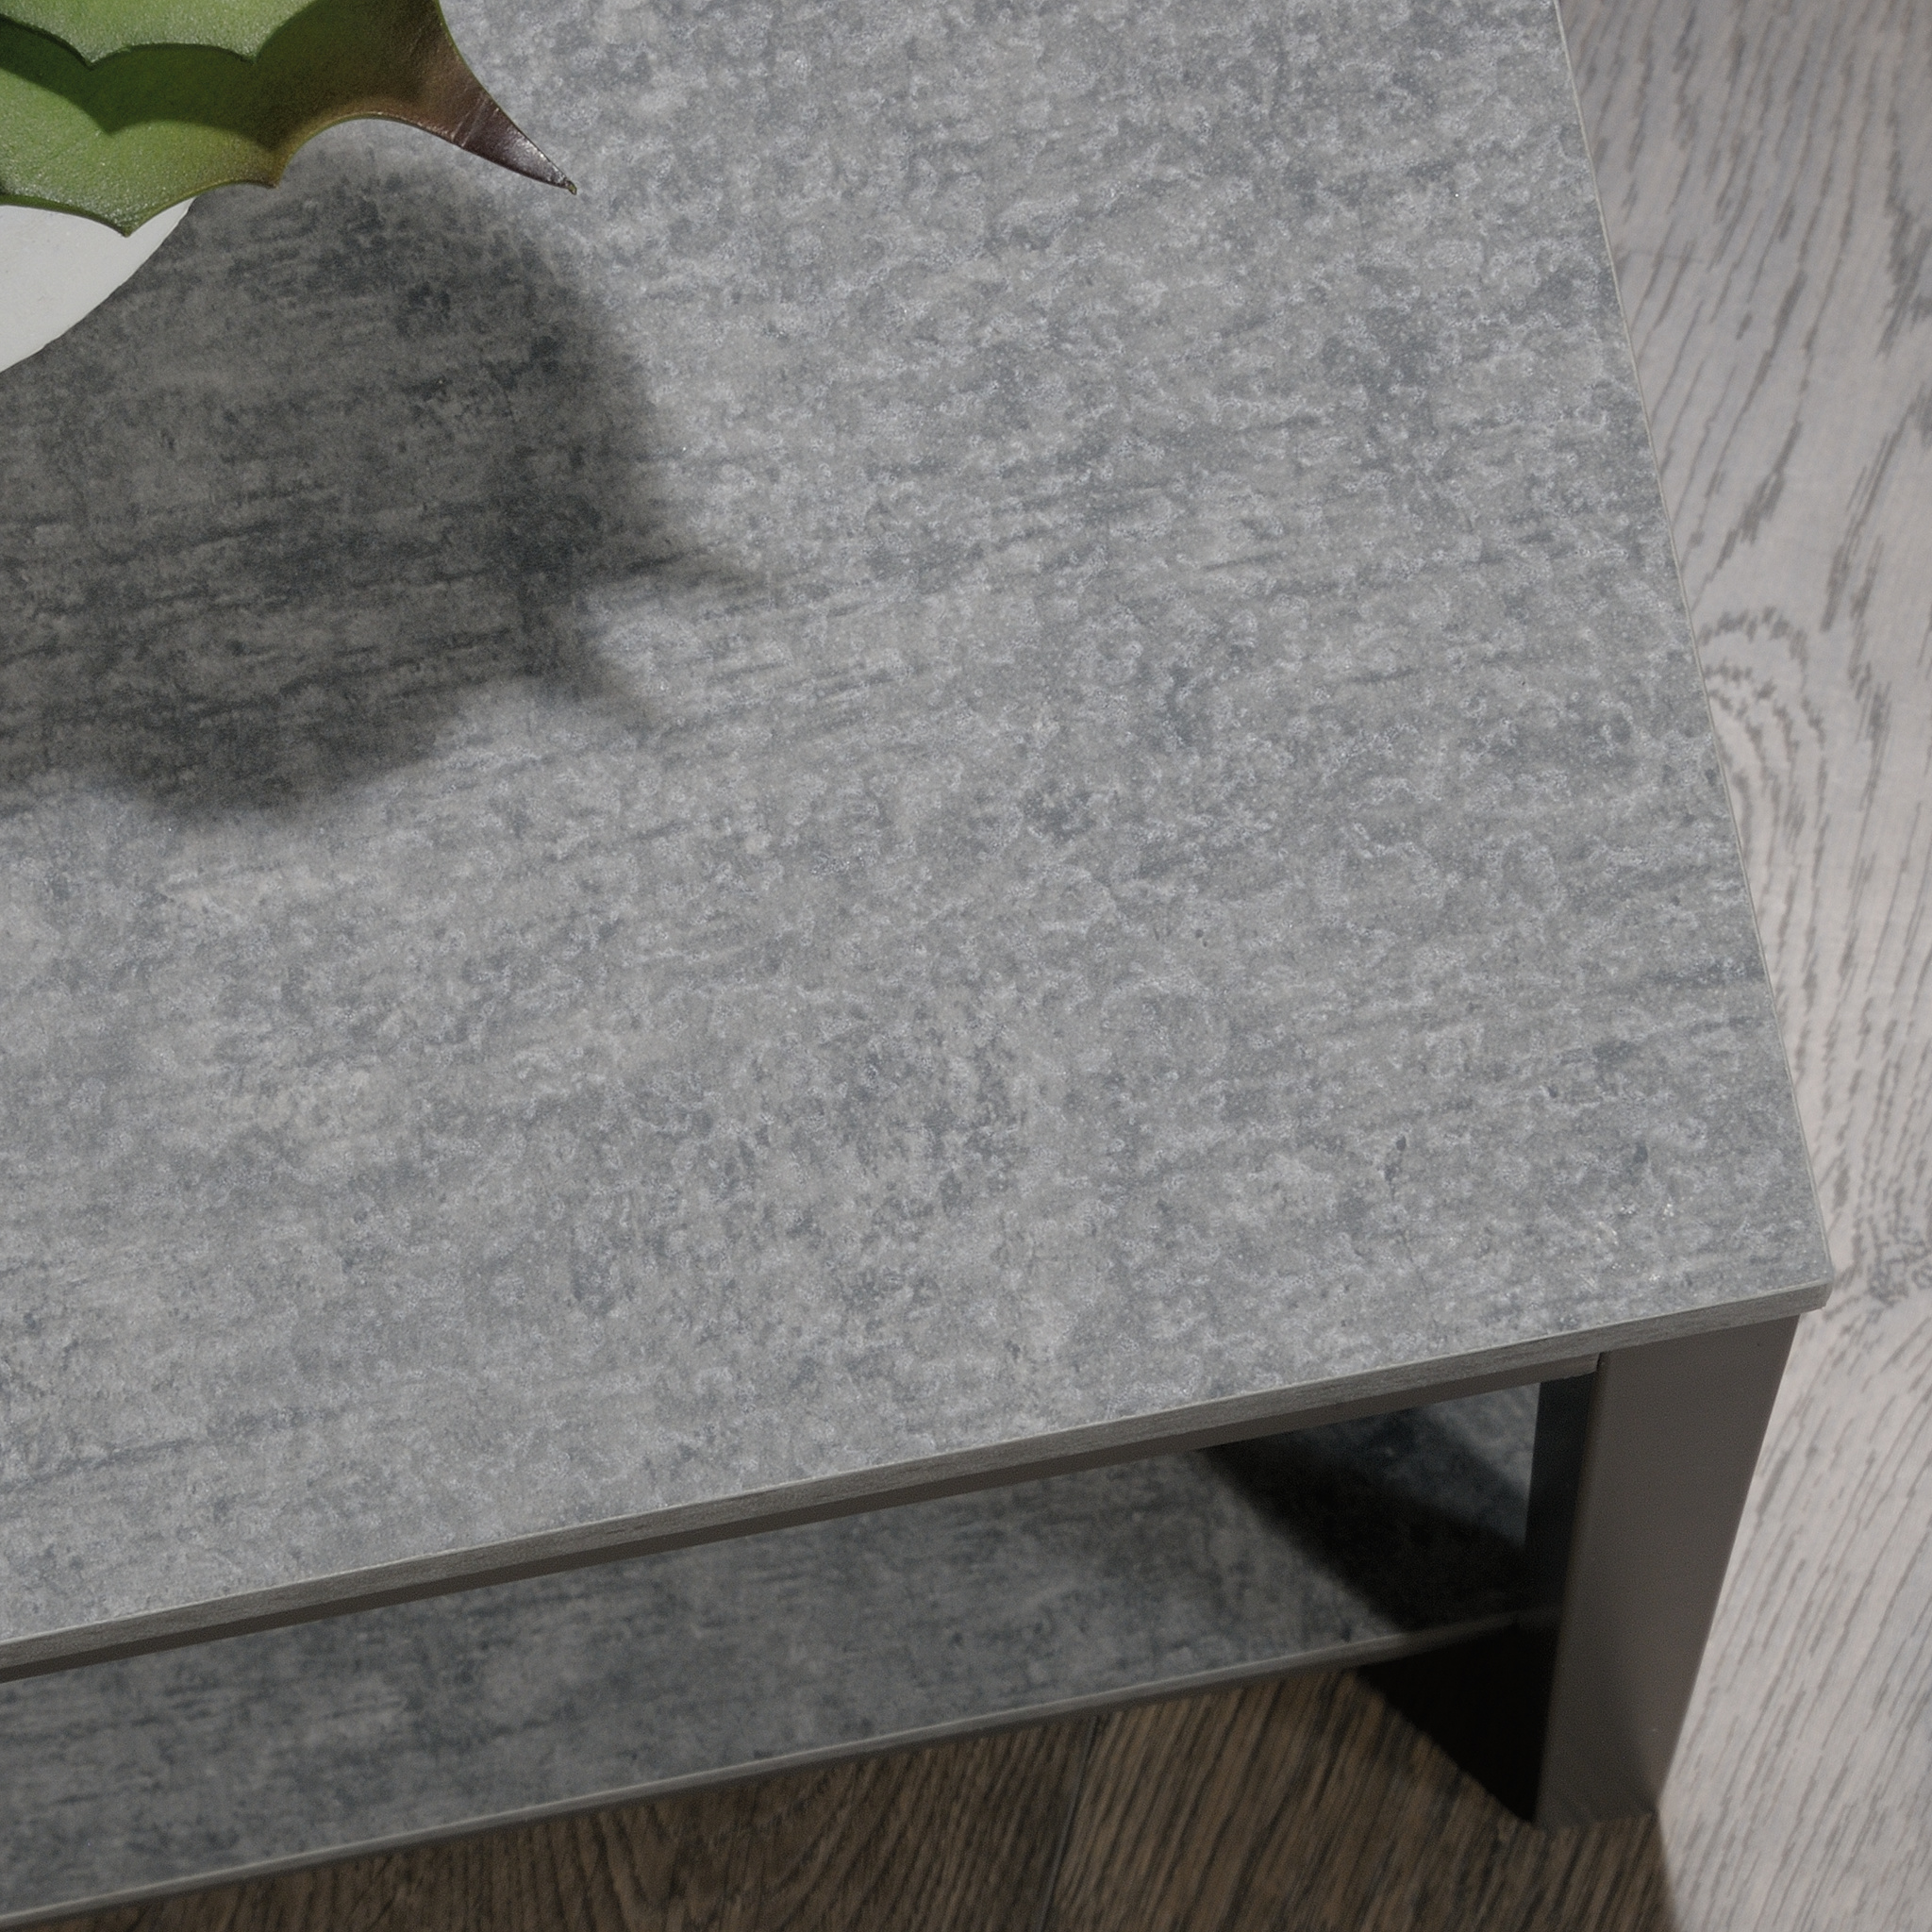 Curiod Square Metal Frame End Table, Faux Concrete Finish - image 3 of 9